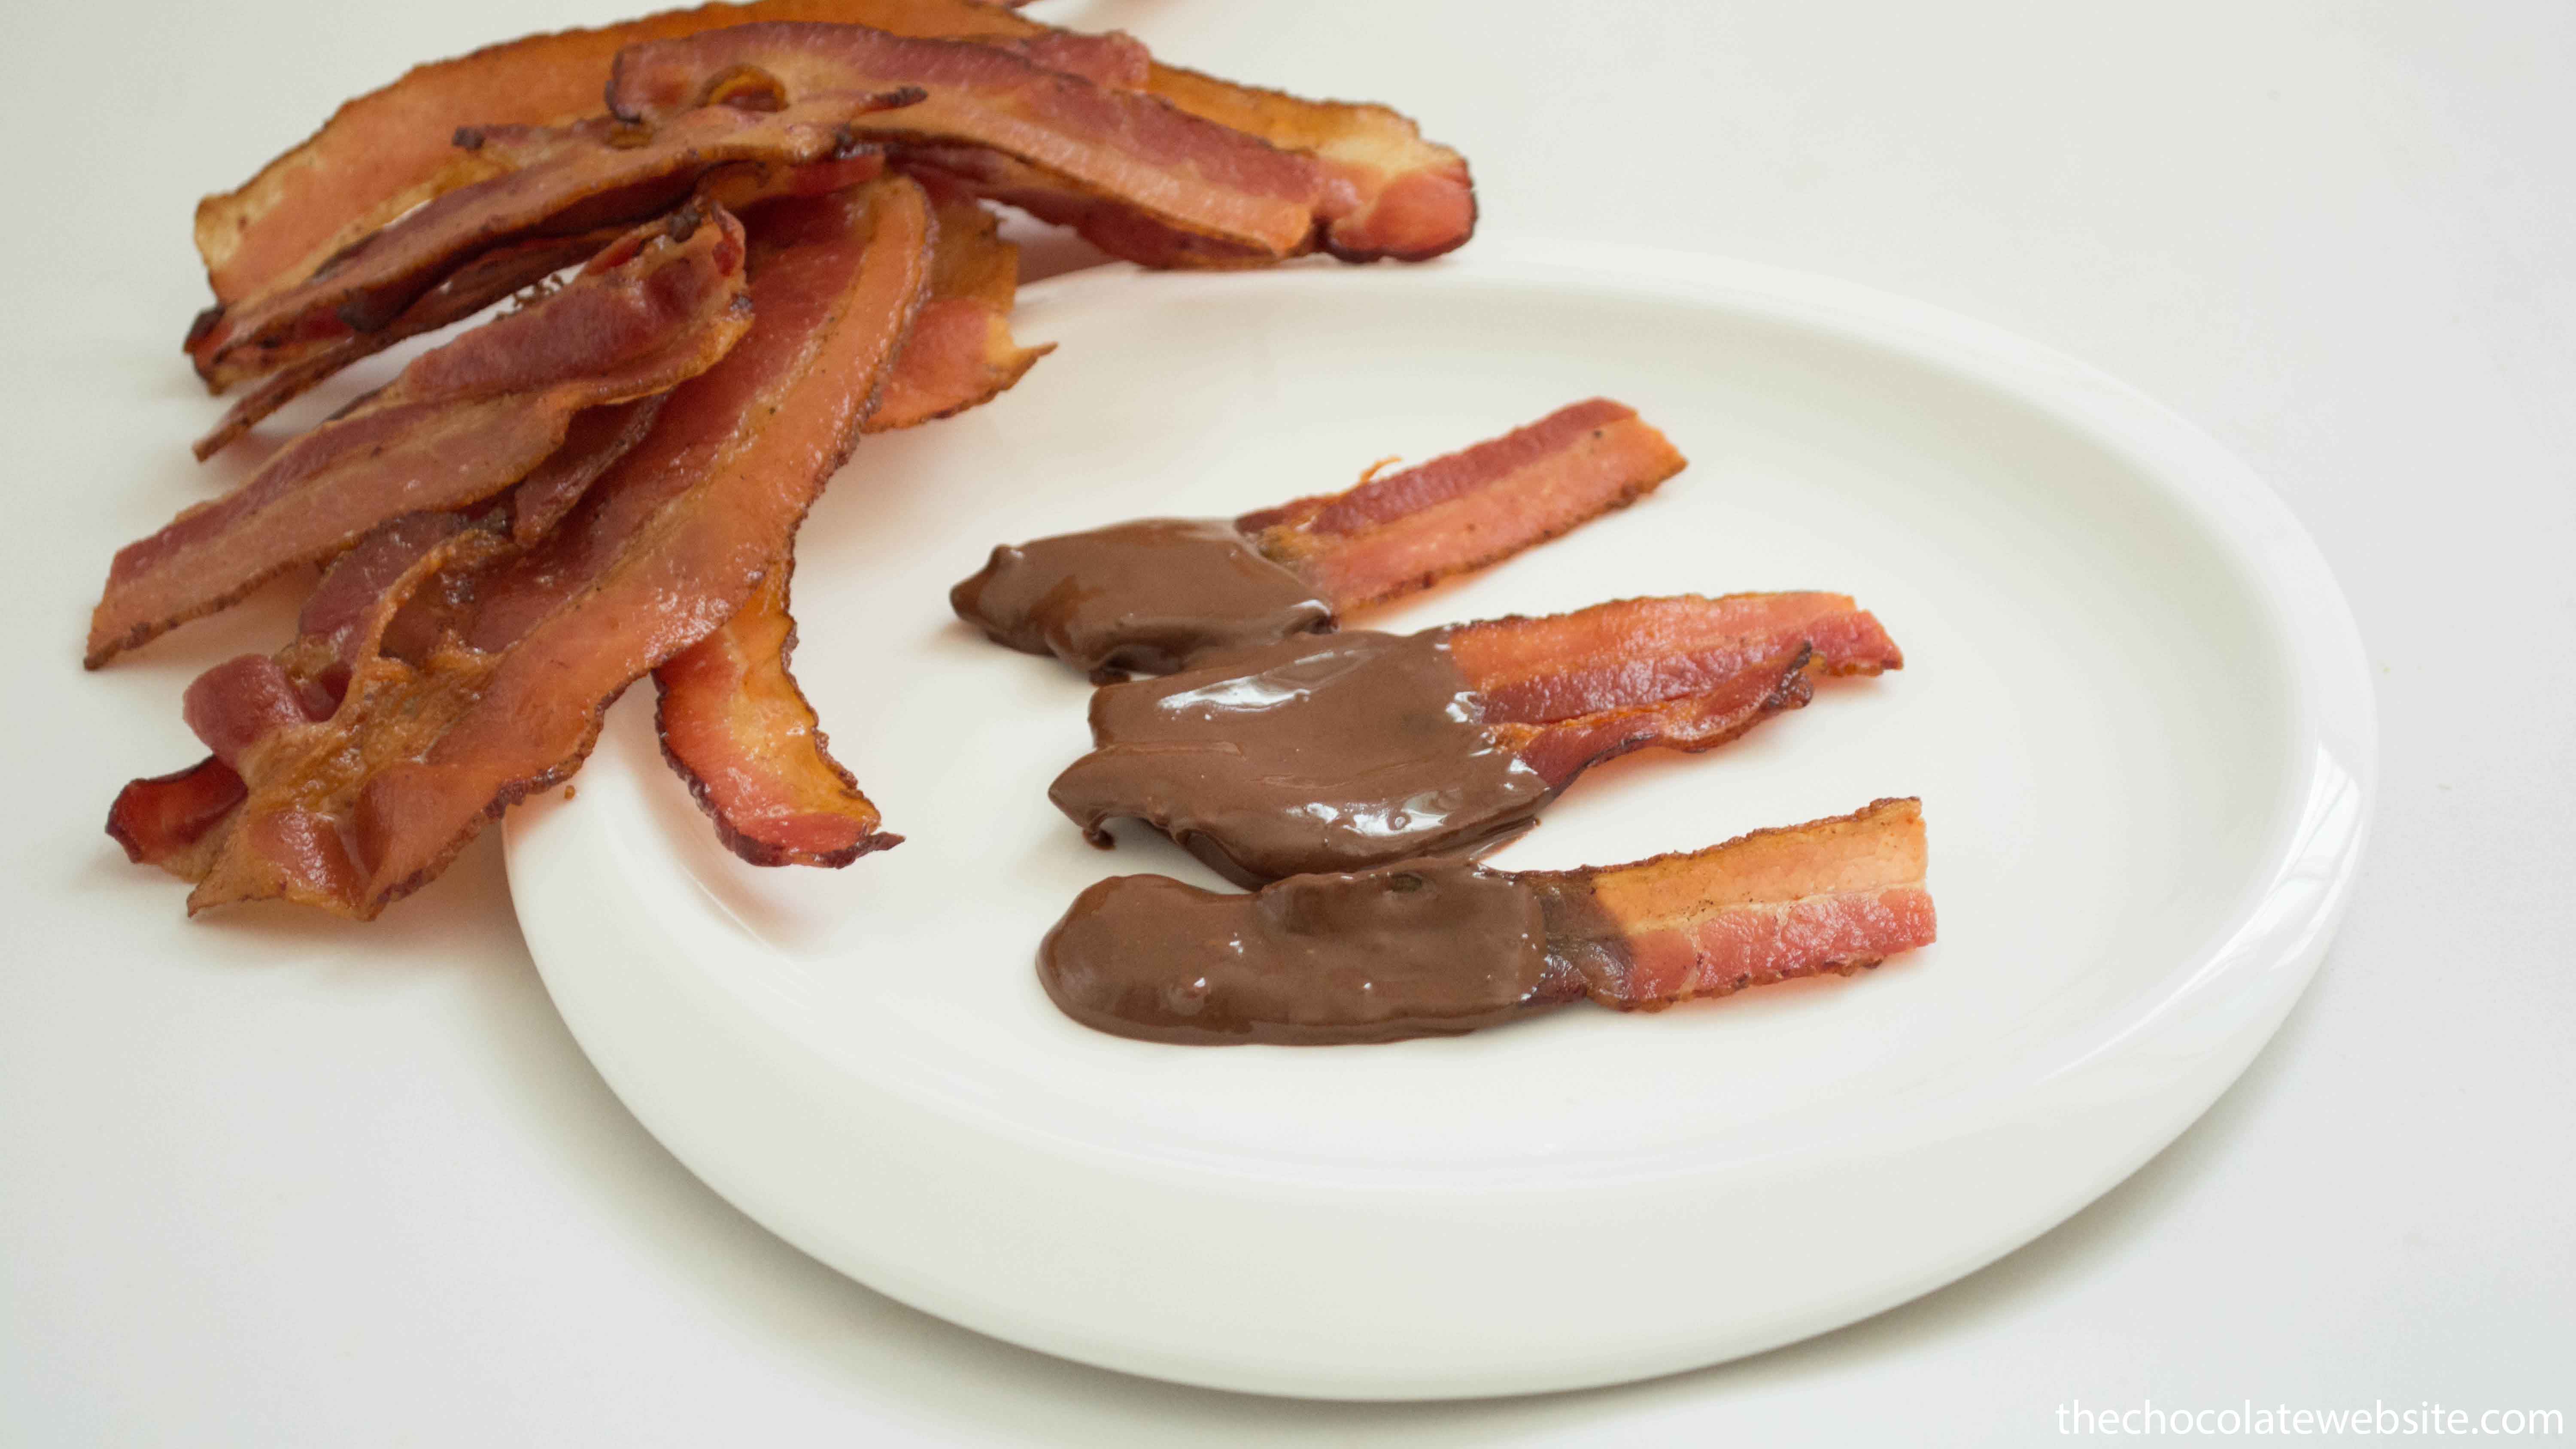 Foods Dipped in Chocolate - Bacon